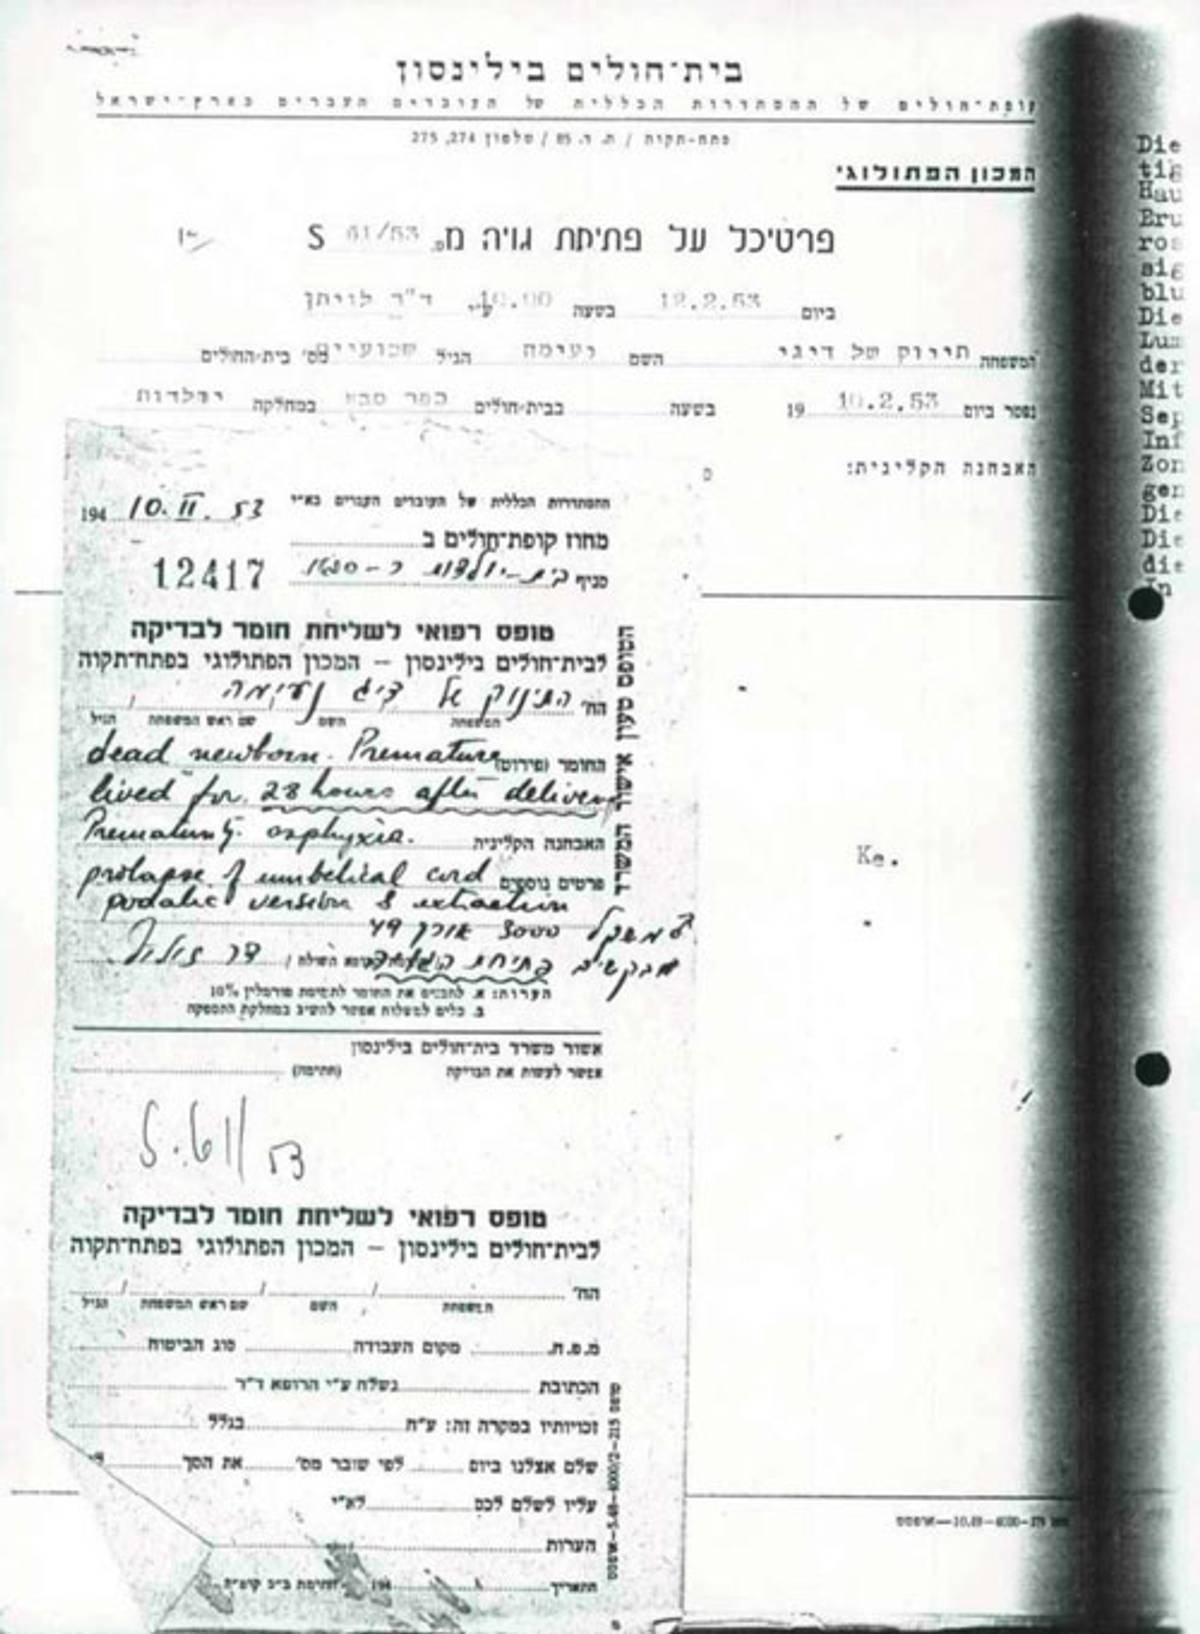 Protocols of an autopsy at the Beilinson Hospital, Petach Tikva, 1953 (Israeli State Archives)